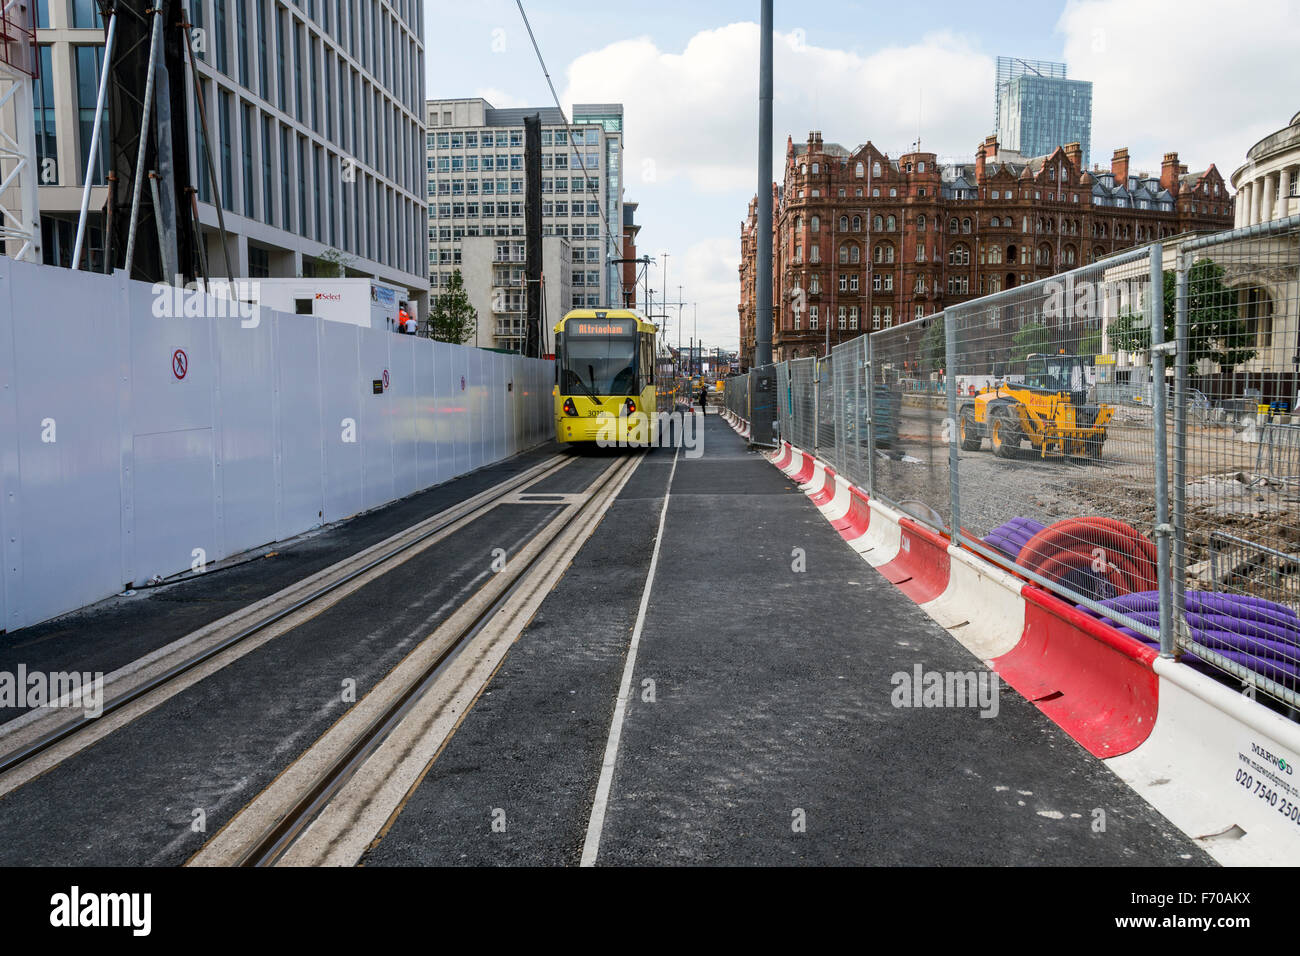 Metrolonk tram at St. Peter's Square, Manchester, England, UK, during temporary single line working. Stock Photo